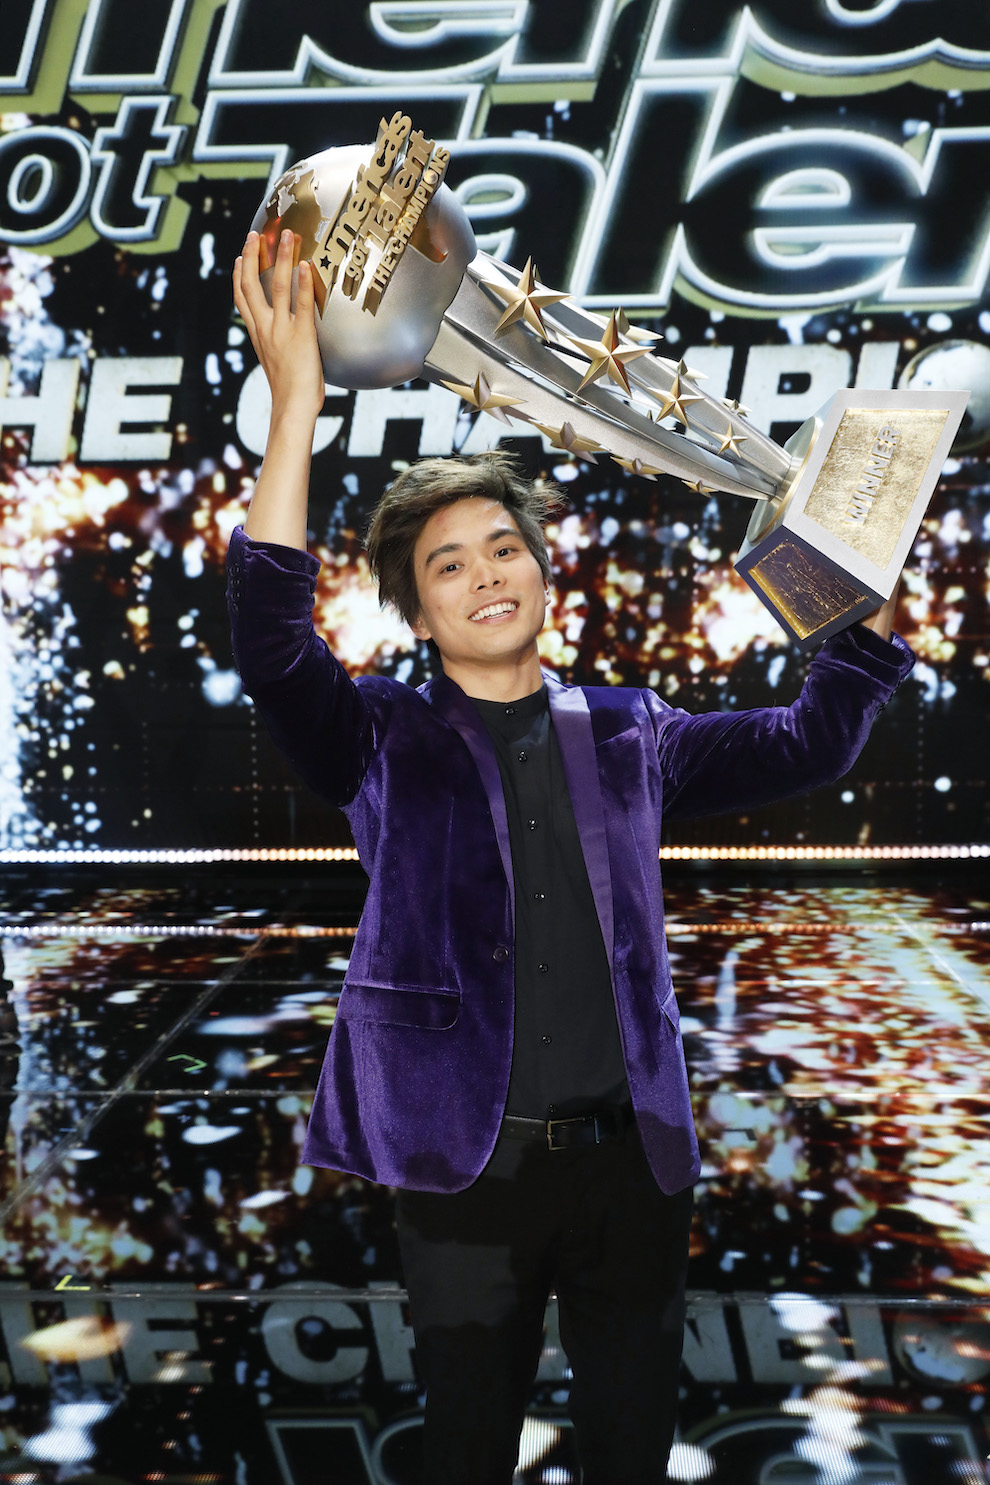 America's Got Talent: The Champions': Magician Shin Lim crowned winner of winter hit series